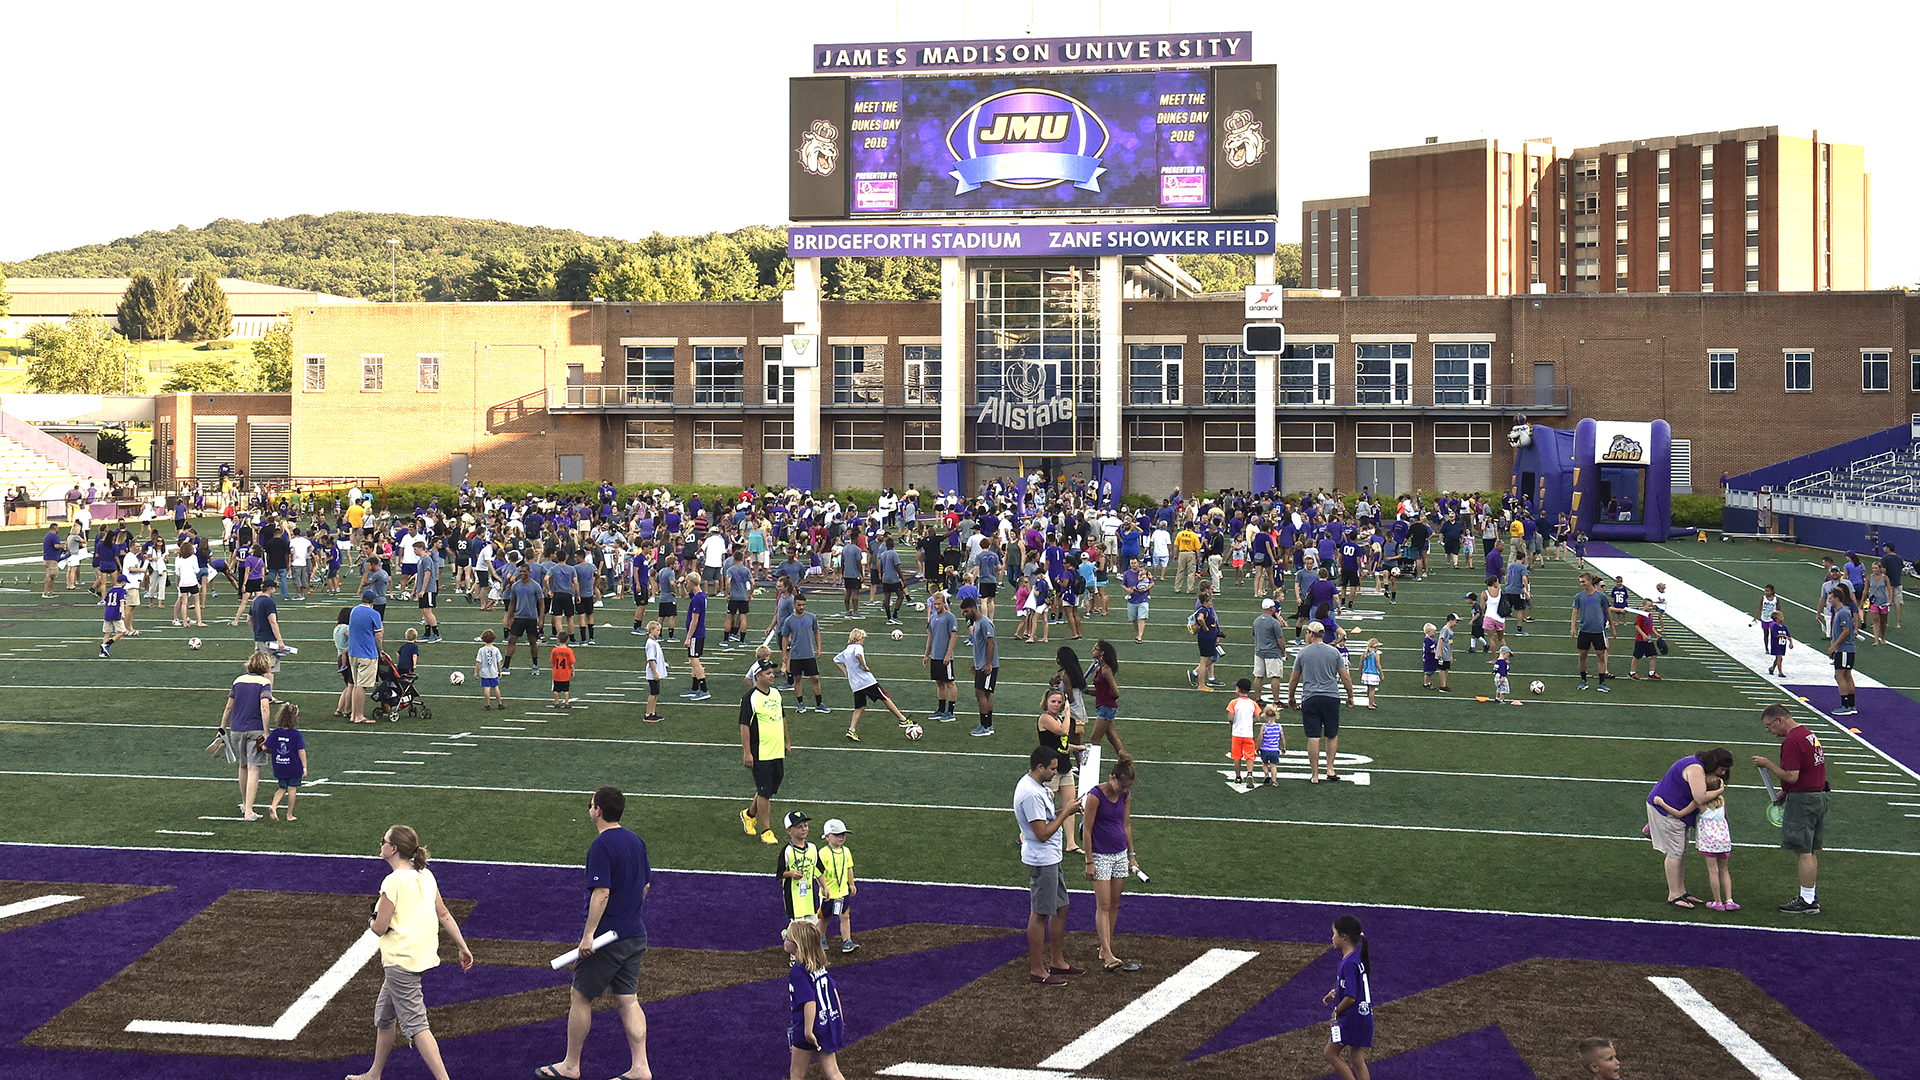 Jmu To Host Annual Meet The Dukes Day On August James Madison